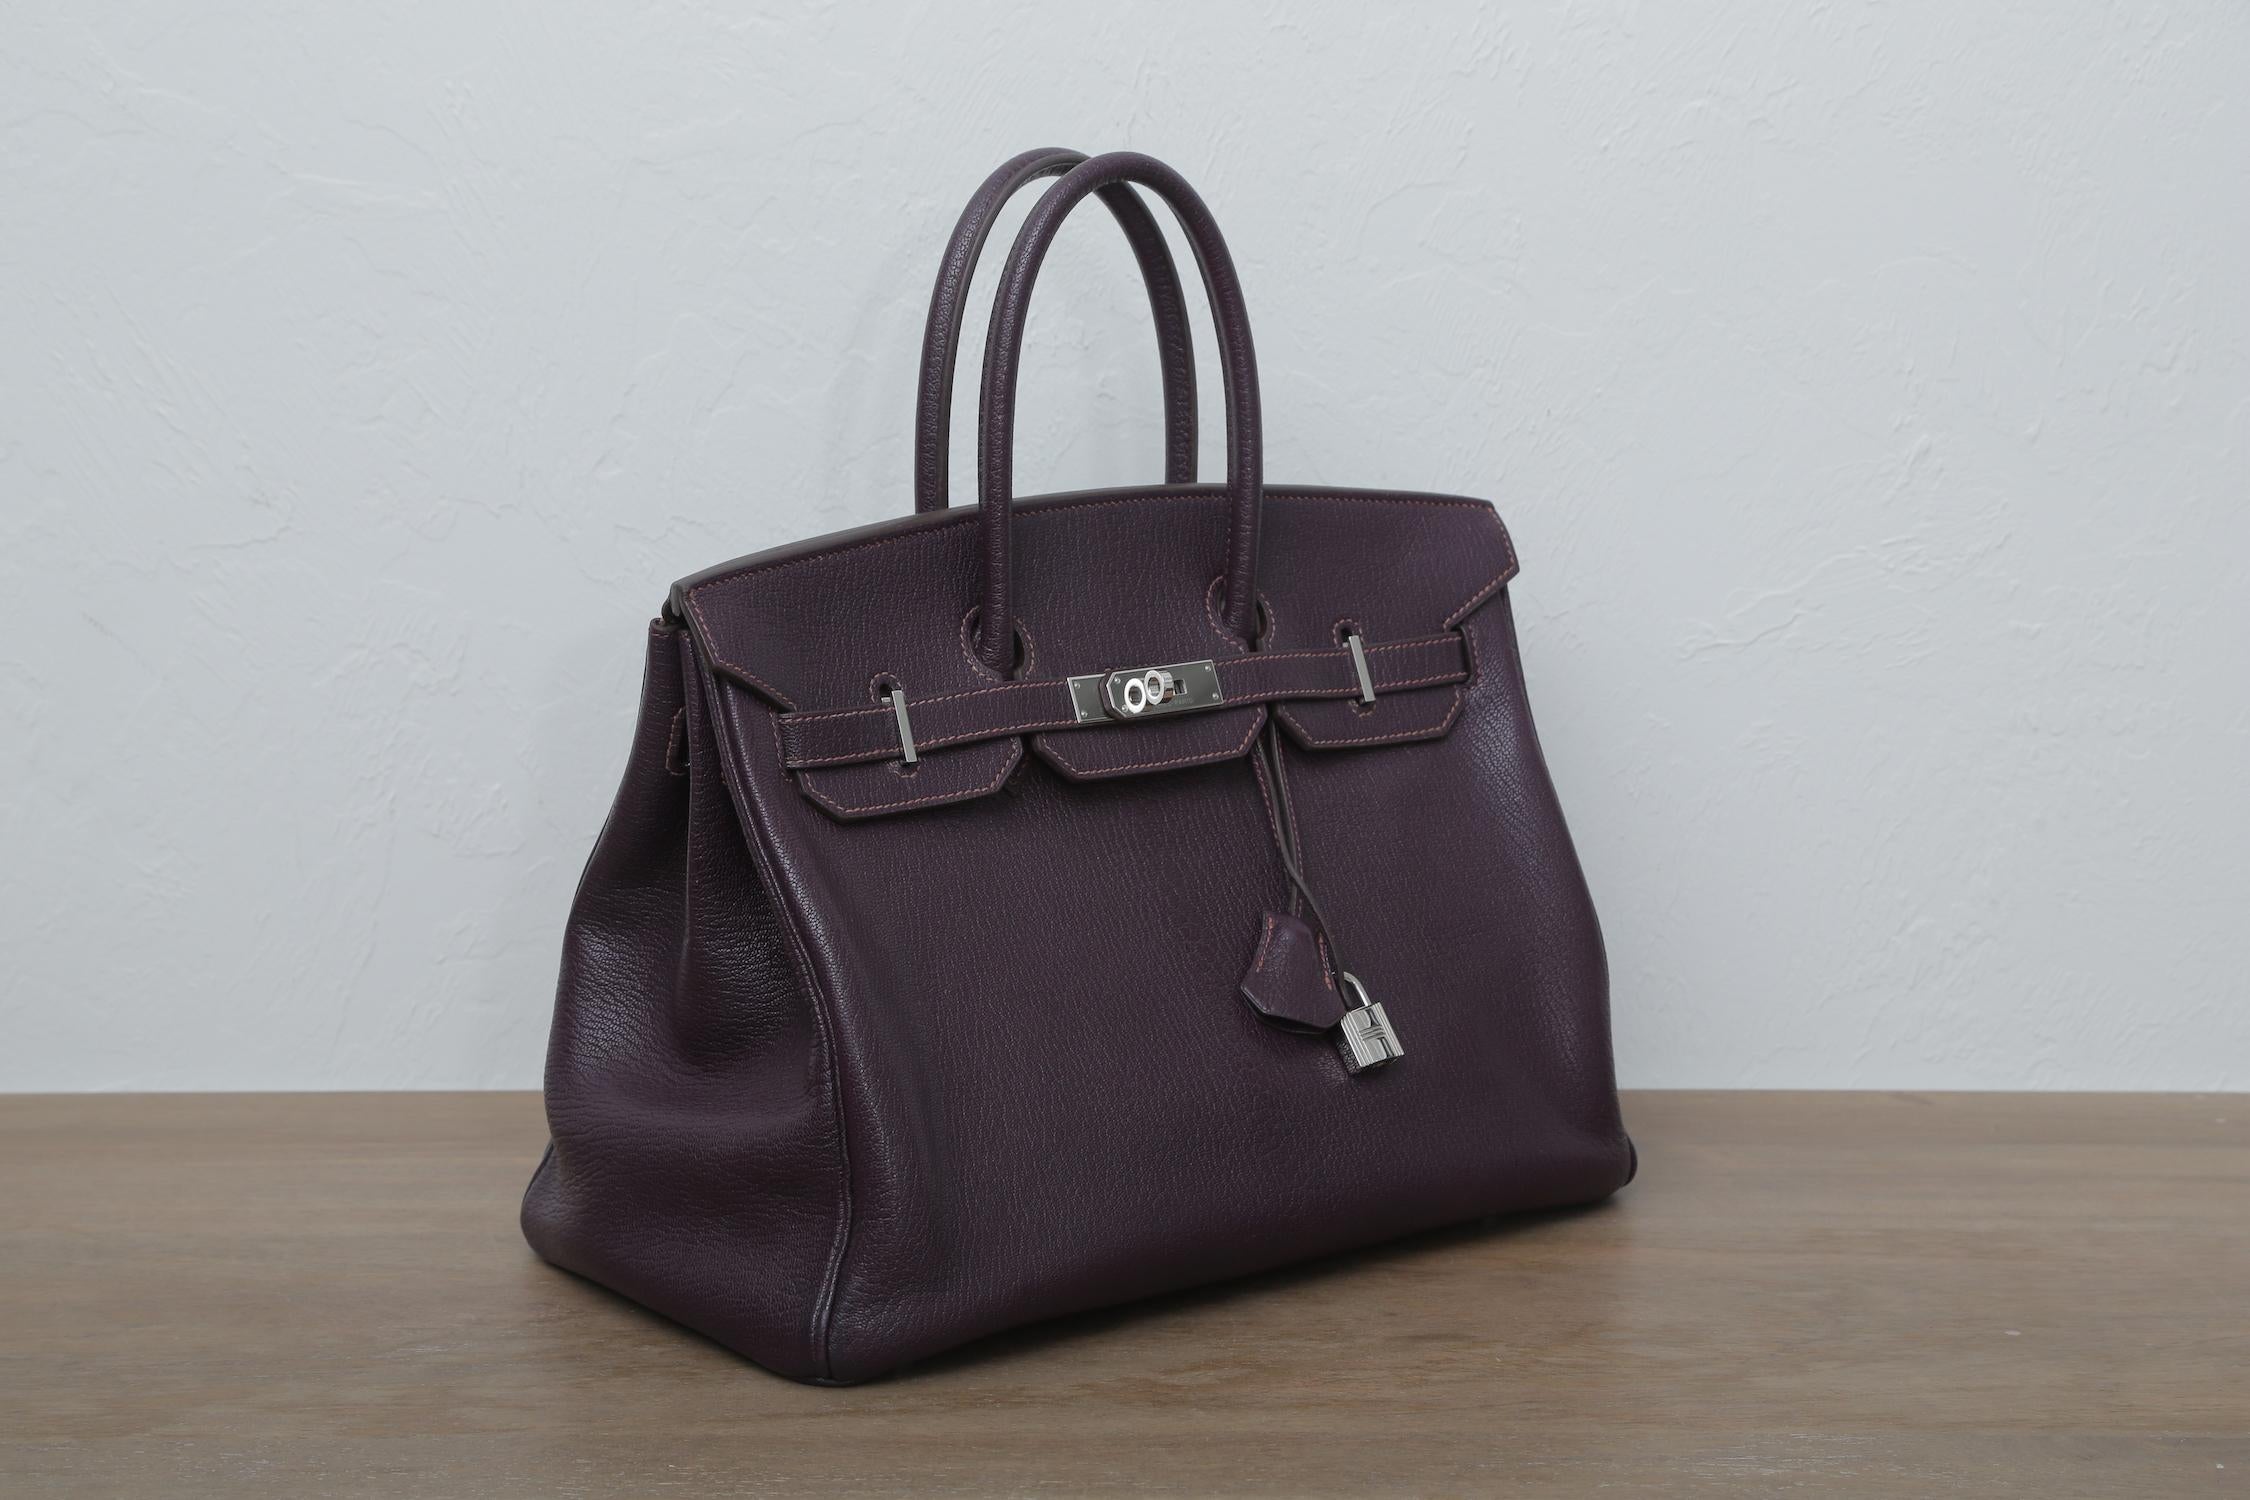 Hermes 2014 Birkin 35 Raisin with Palladium Hardware R in a Square with duster.